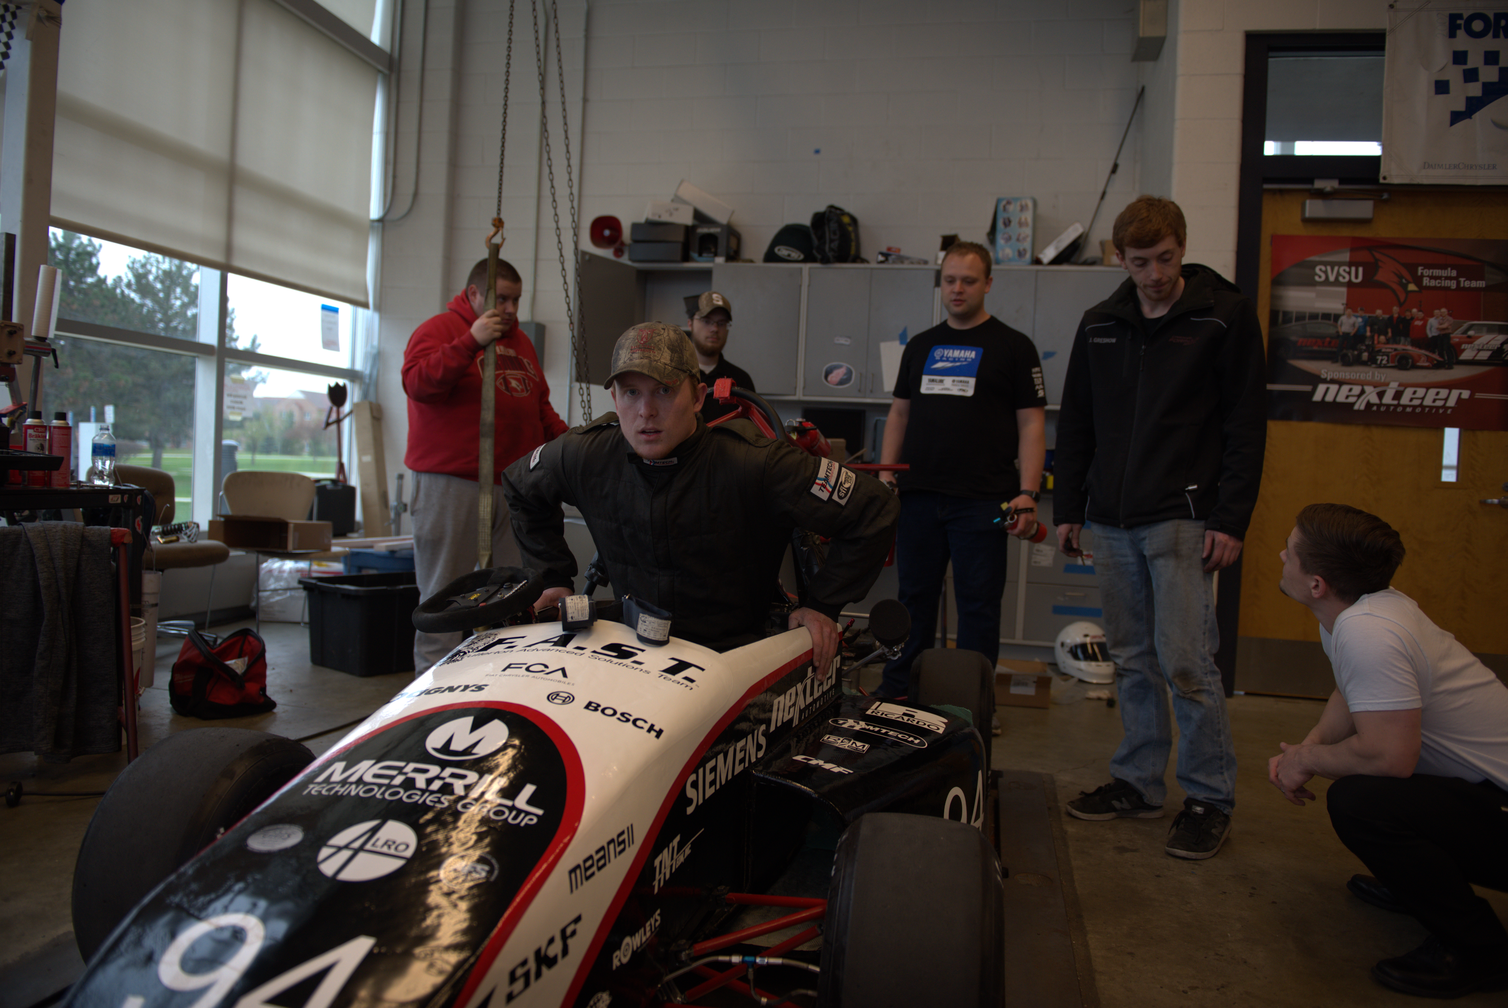 Students around race car on stand